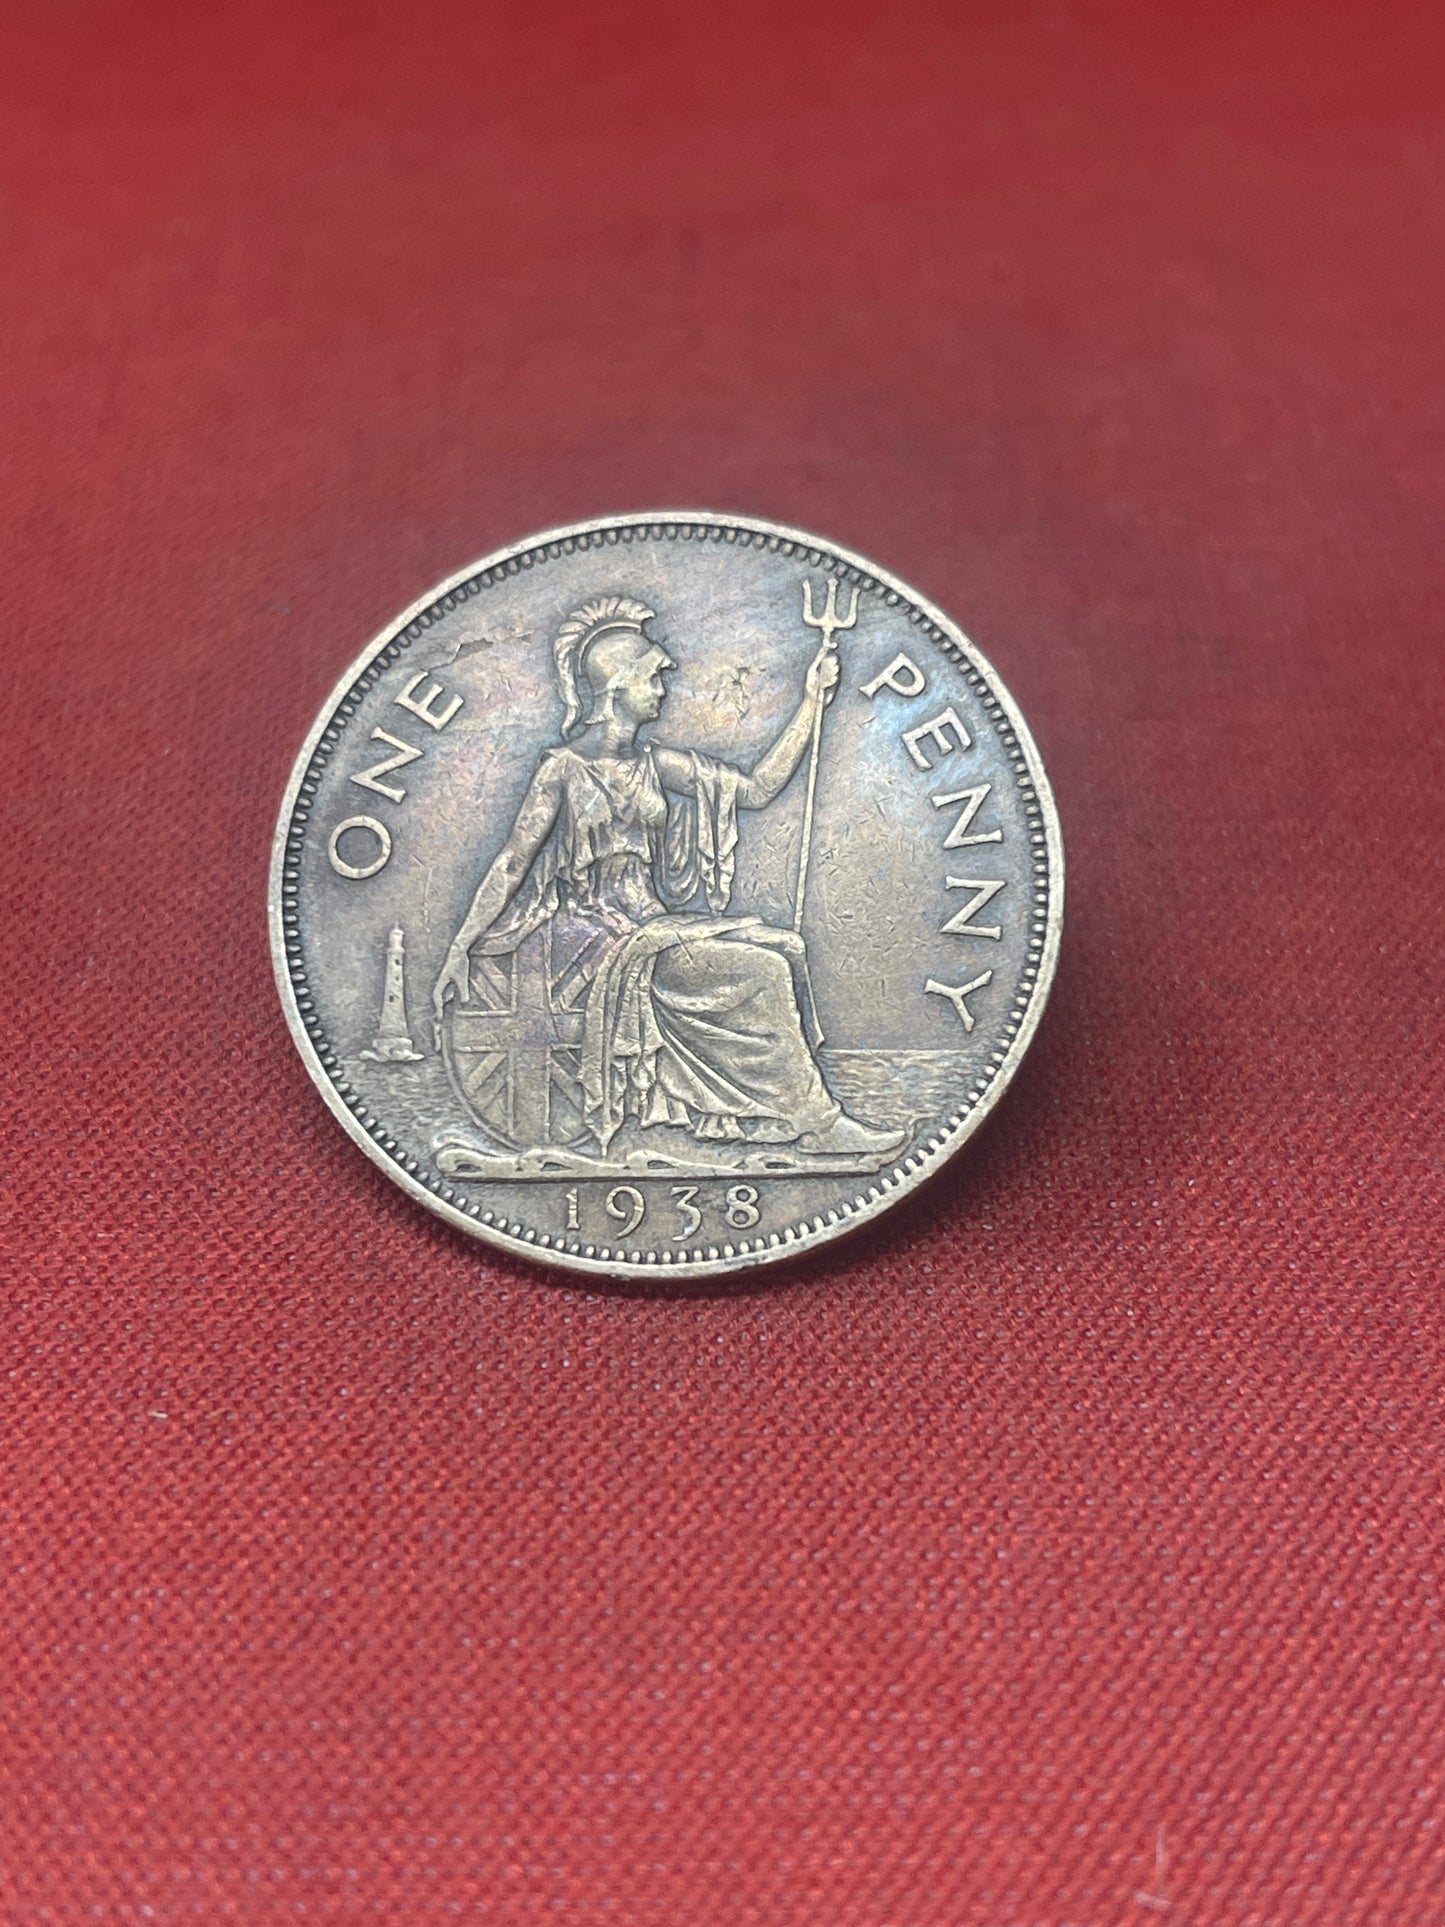 King George VI 1938 One Penny